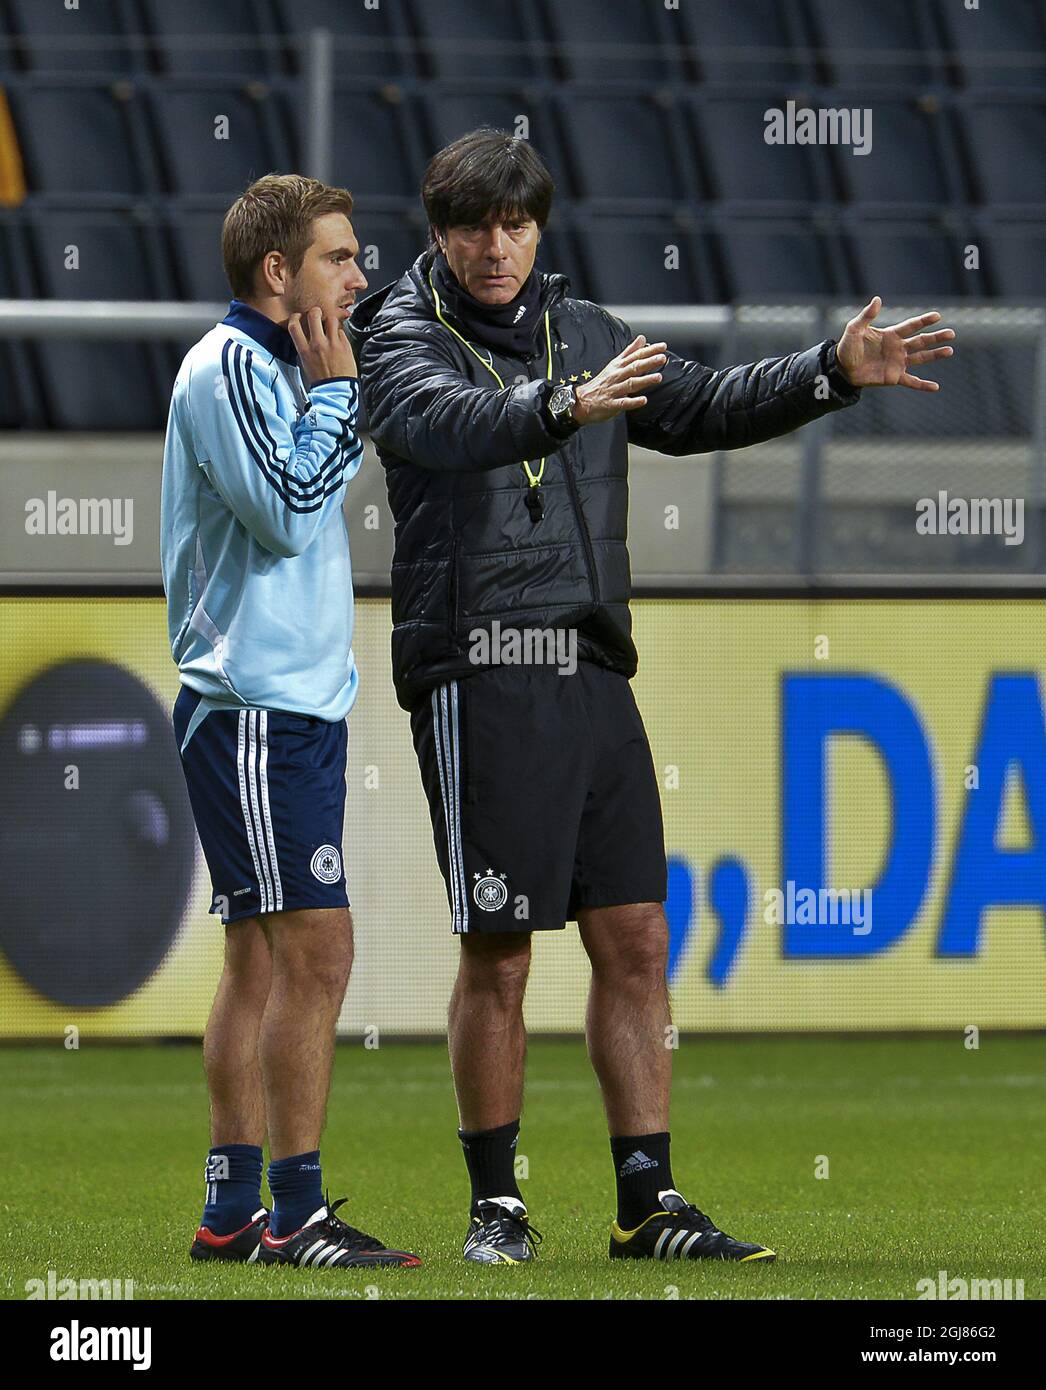 STOCKHOLM 2013-10-14 German national football team coach Joachim Loew and captain Philipp Lahm during the training at Friends Arena in Stockholm, Sweden, October 14, 2013. Germany will play against Sweden in the last World Cup qualifier Tuesday. Photo: Jonas Ekstromer / TT NEWS AGENCY ** SWEDEN OUT ** Stock Photo